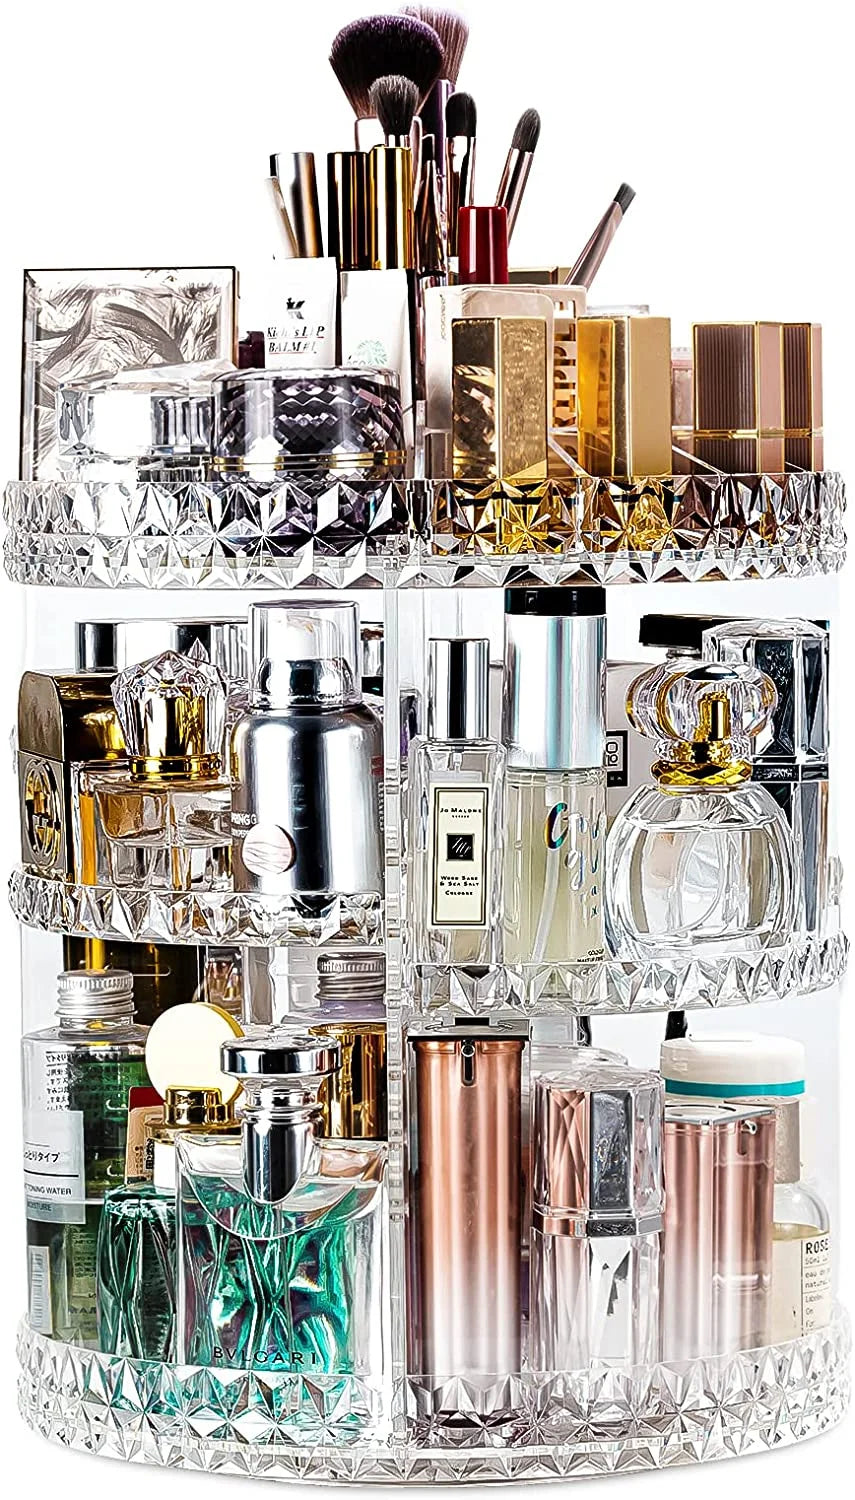 Makeup Organizer, 360 Degree Rotating Perfume Organizer, Adjustable Makeup Organizers and Storage with 8 Layers , Fits Makeup Brushes Lipsticks and Jewelry, Clear Acrylic